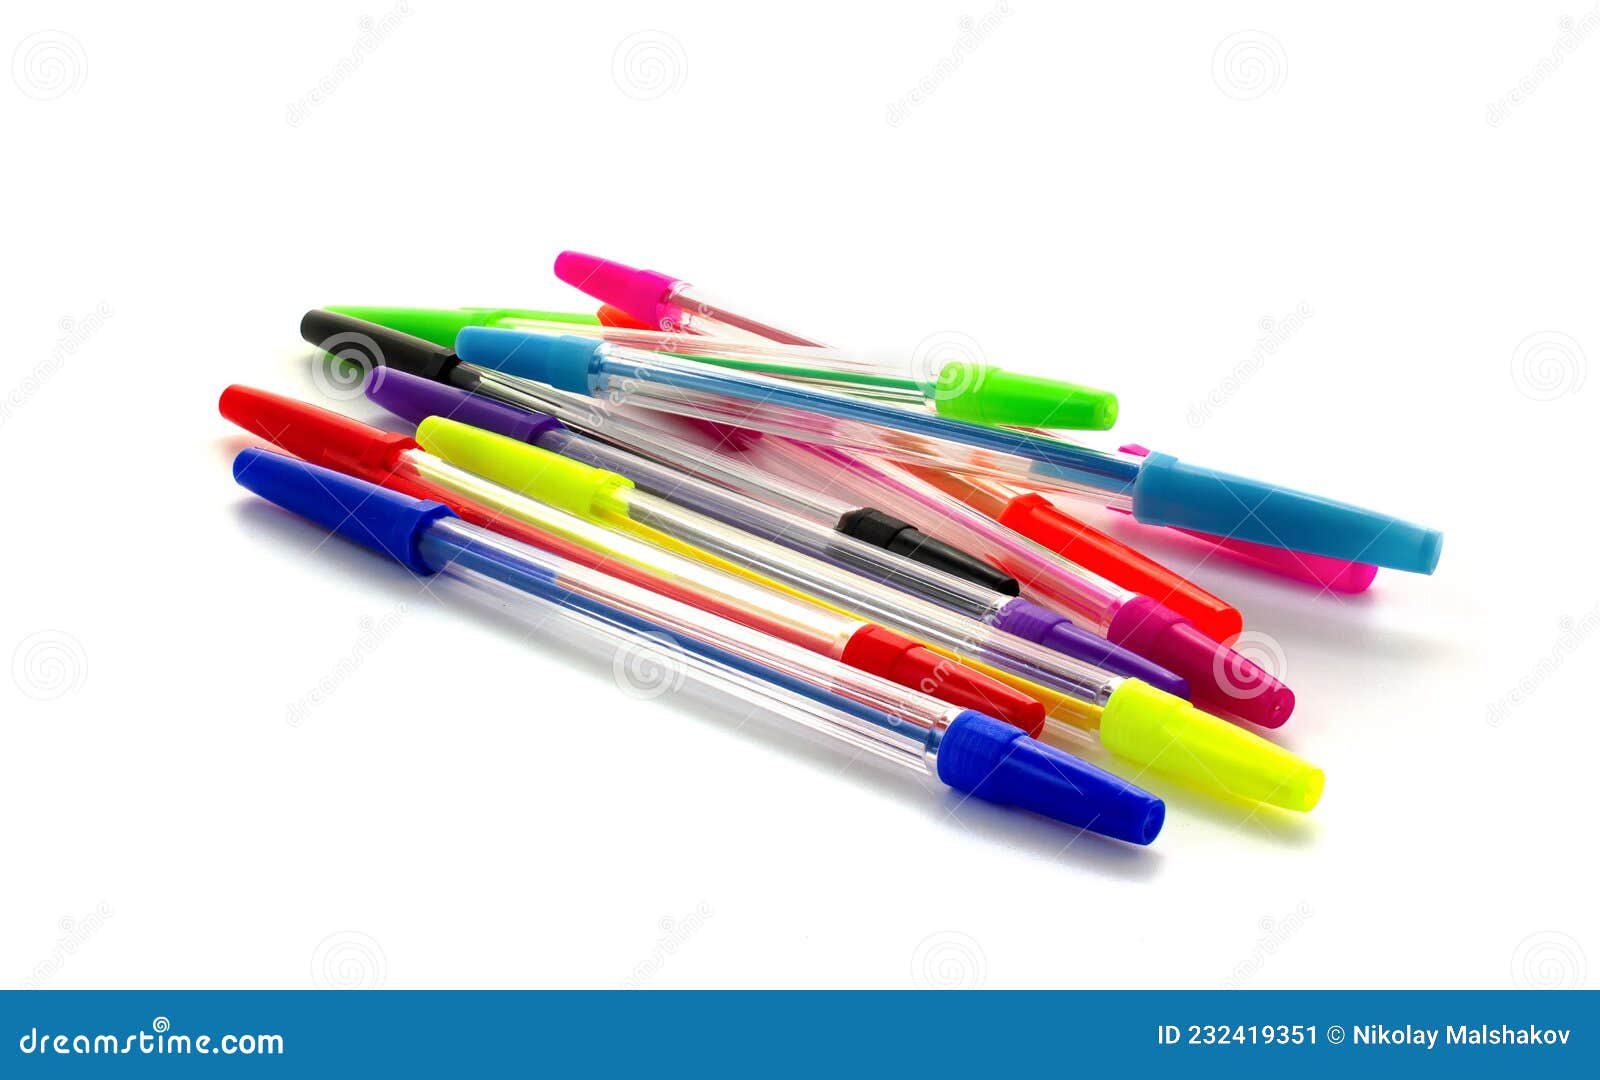 Multicolored Pens Isolated on White Background. Ballpoint Pens Lie on  White. Stock Image - Image of education, equipment: 232419351